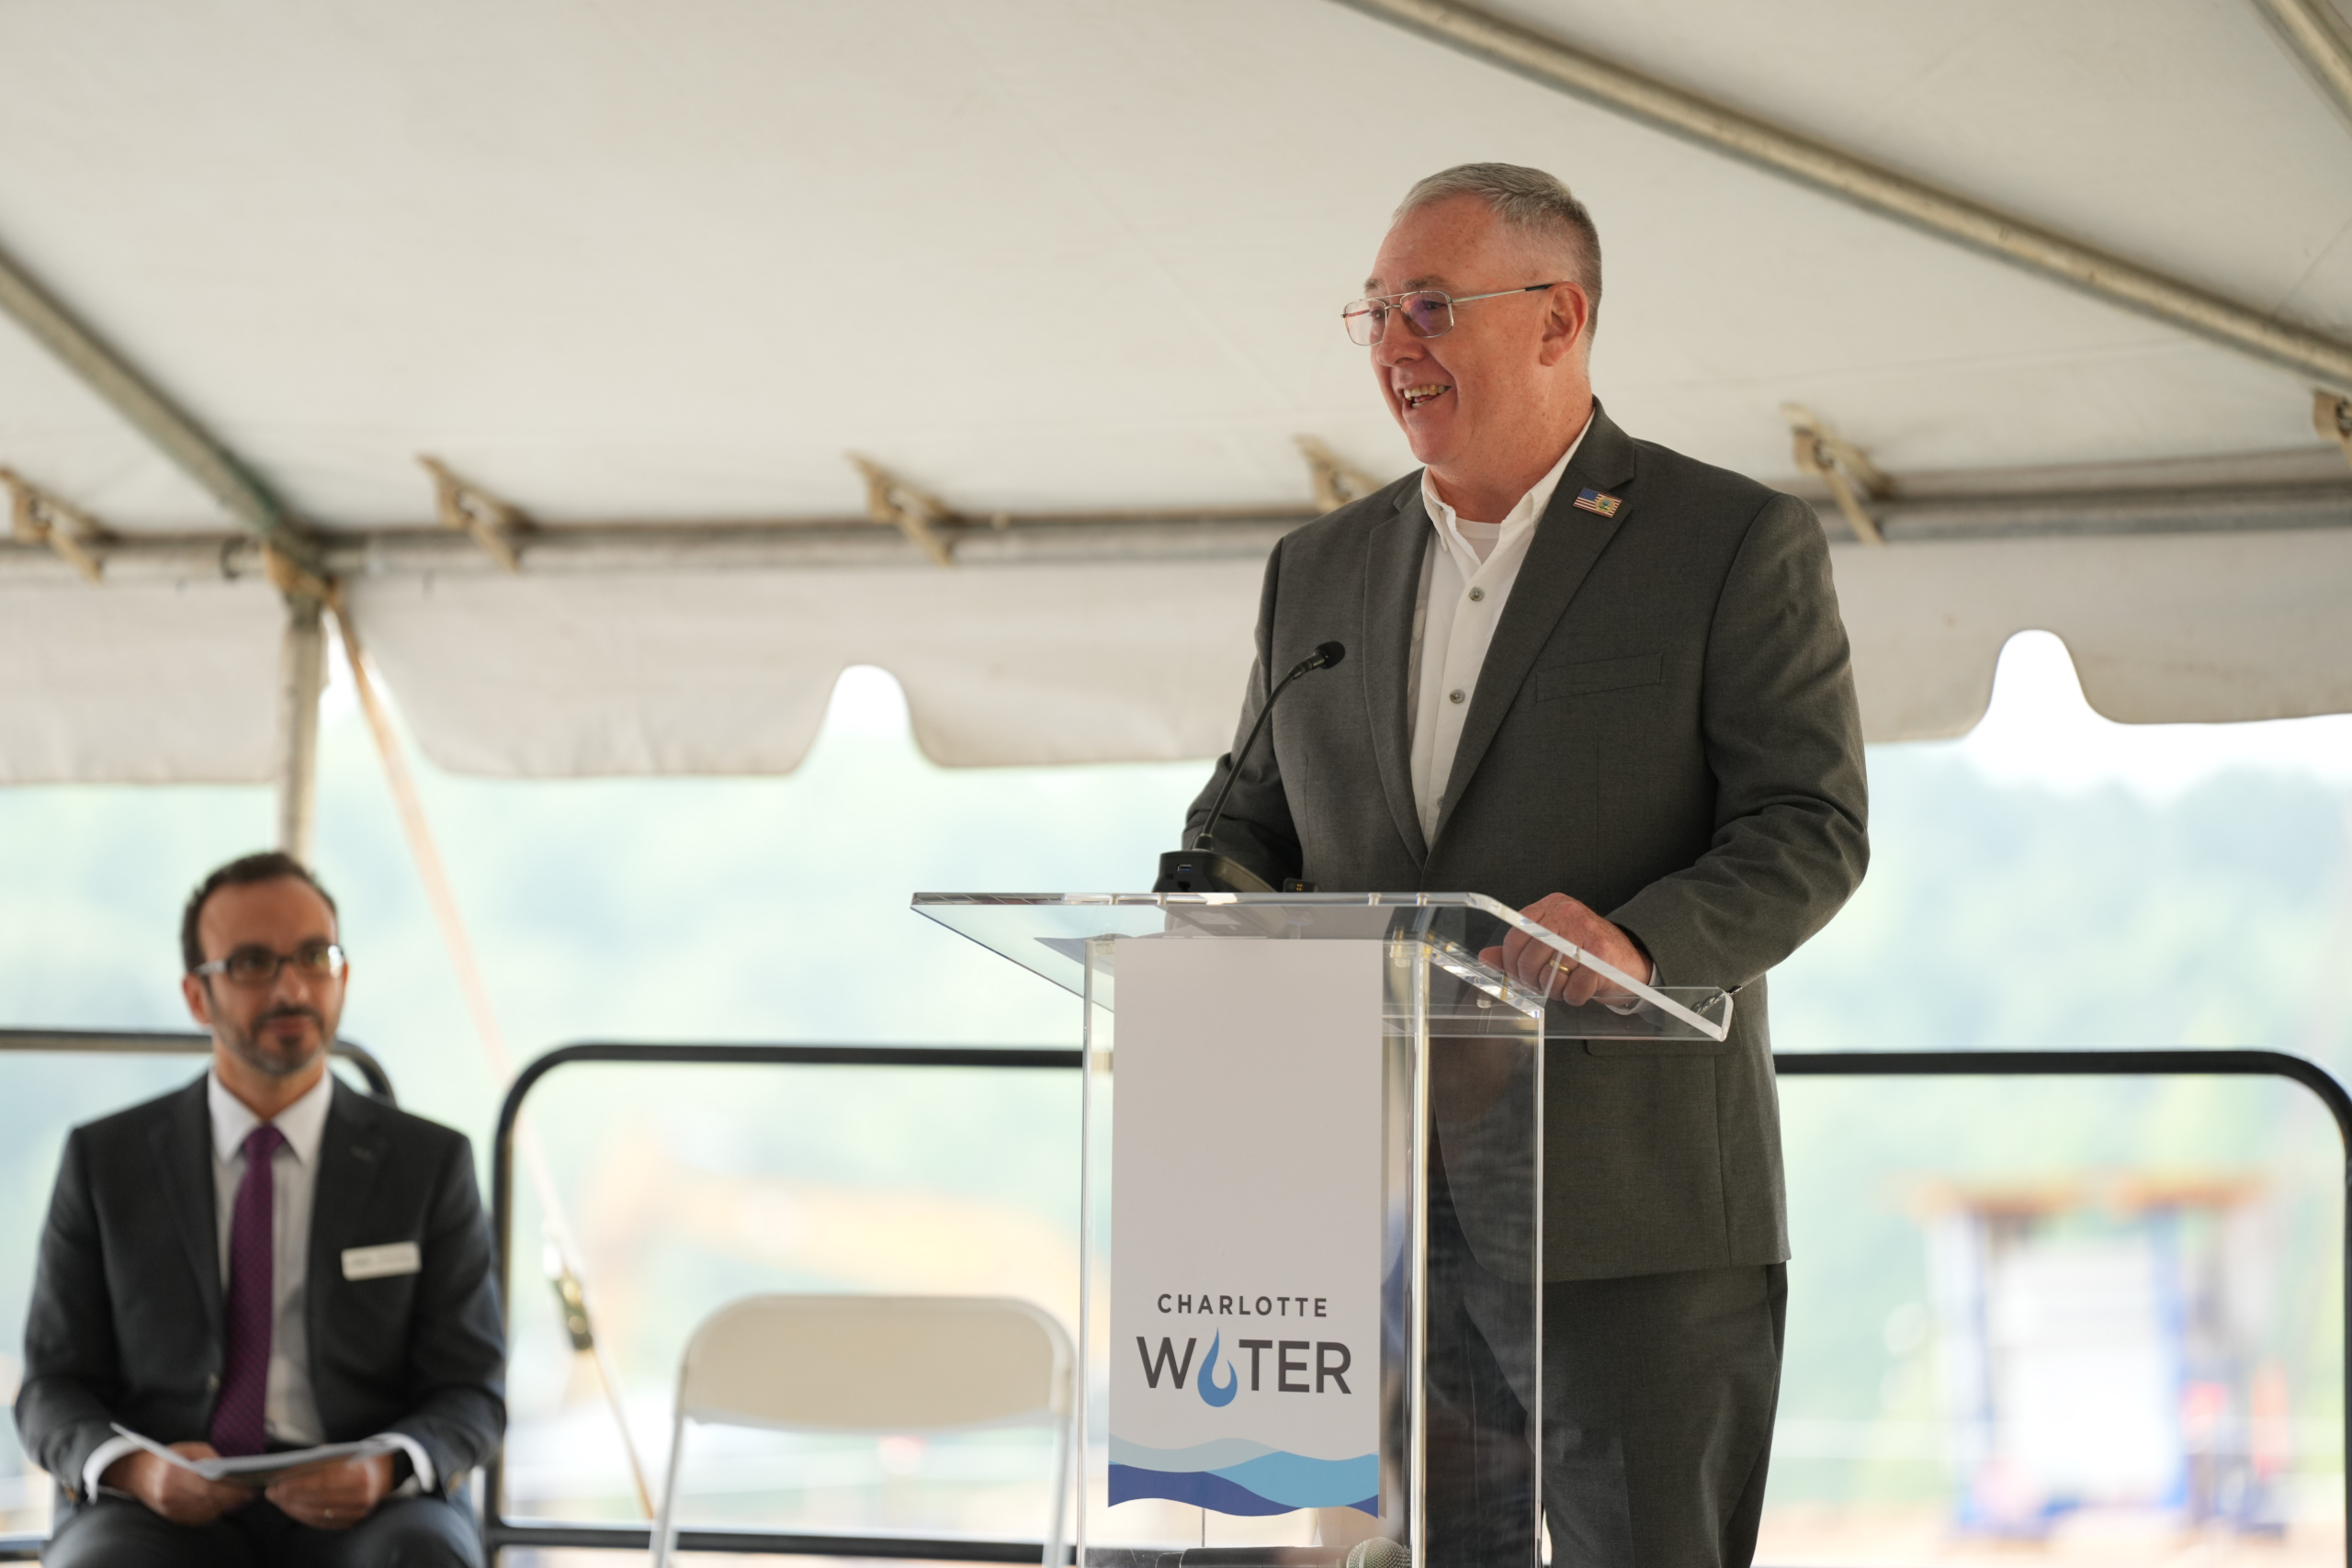 John Nicholson speaks at the Charlotte Water podium with Shadi Eskaf watching from his seat on stage behind him.